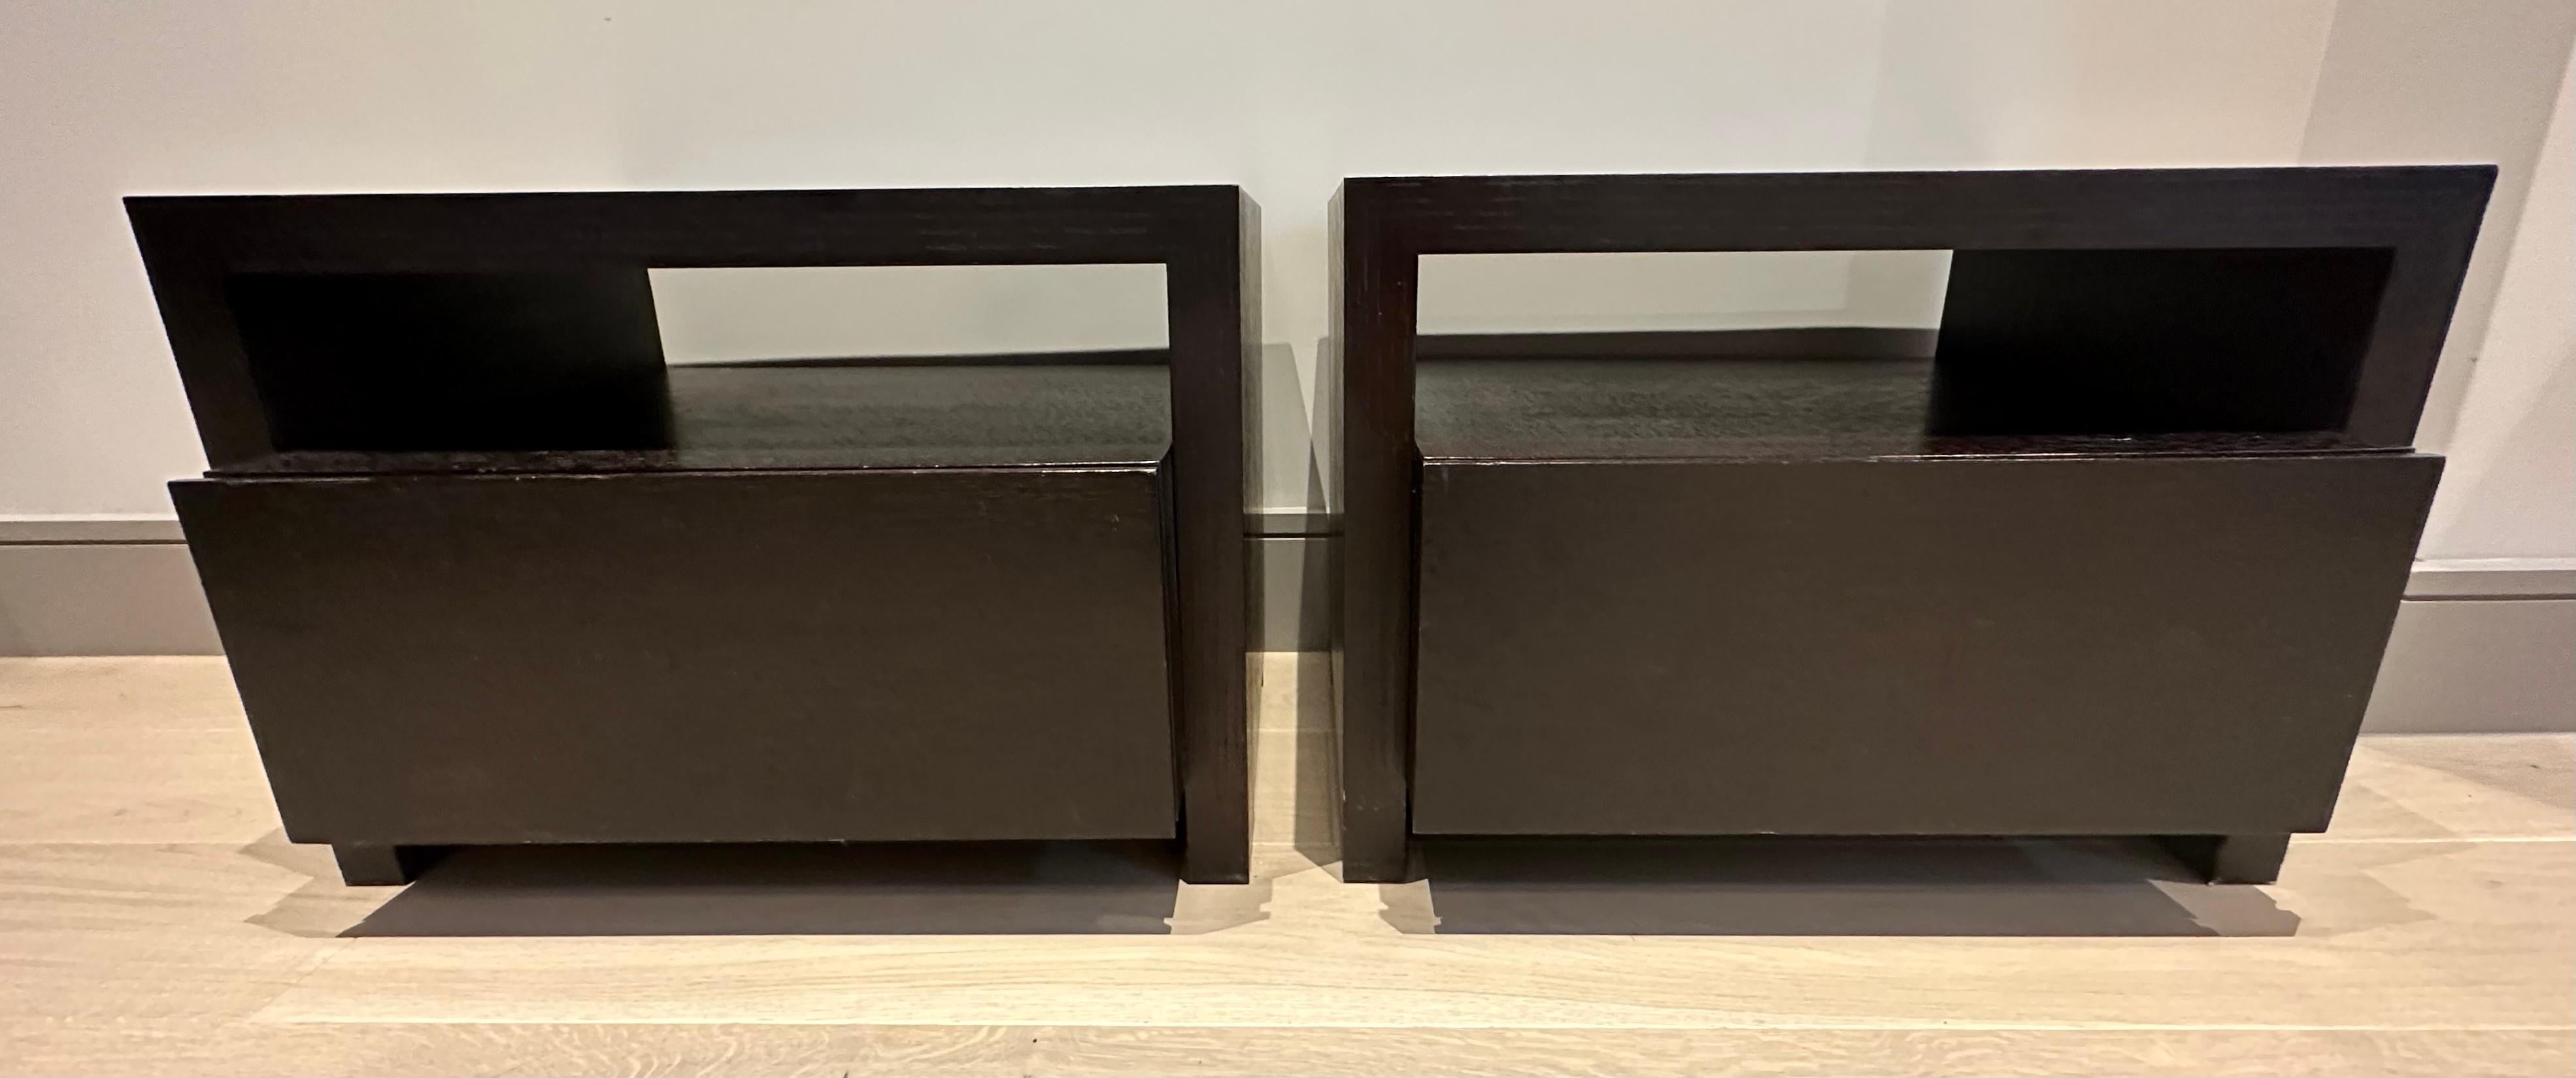 A pair of very well made dark chocolate brown veneered oak bedside tables or nightstands with a single central deep drawer.  Custom made in England in the 1990s.  Simply designed with a single pull drawer with no handle. Stained with a dark brown